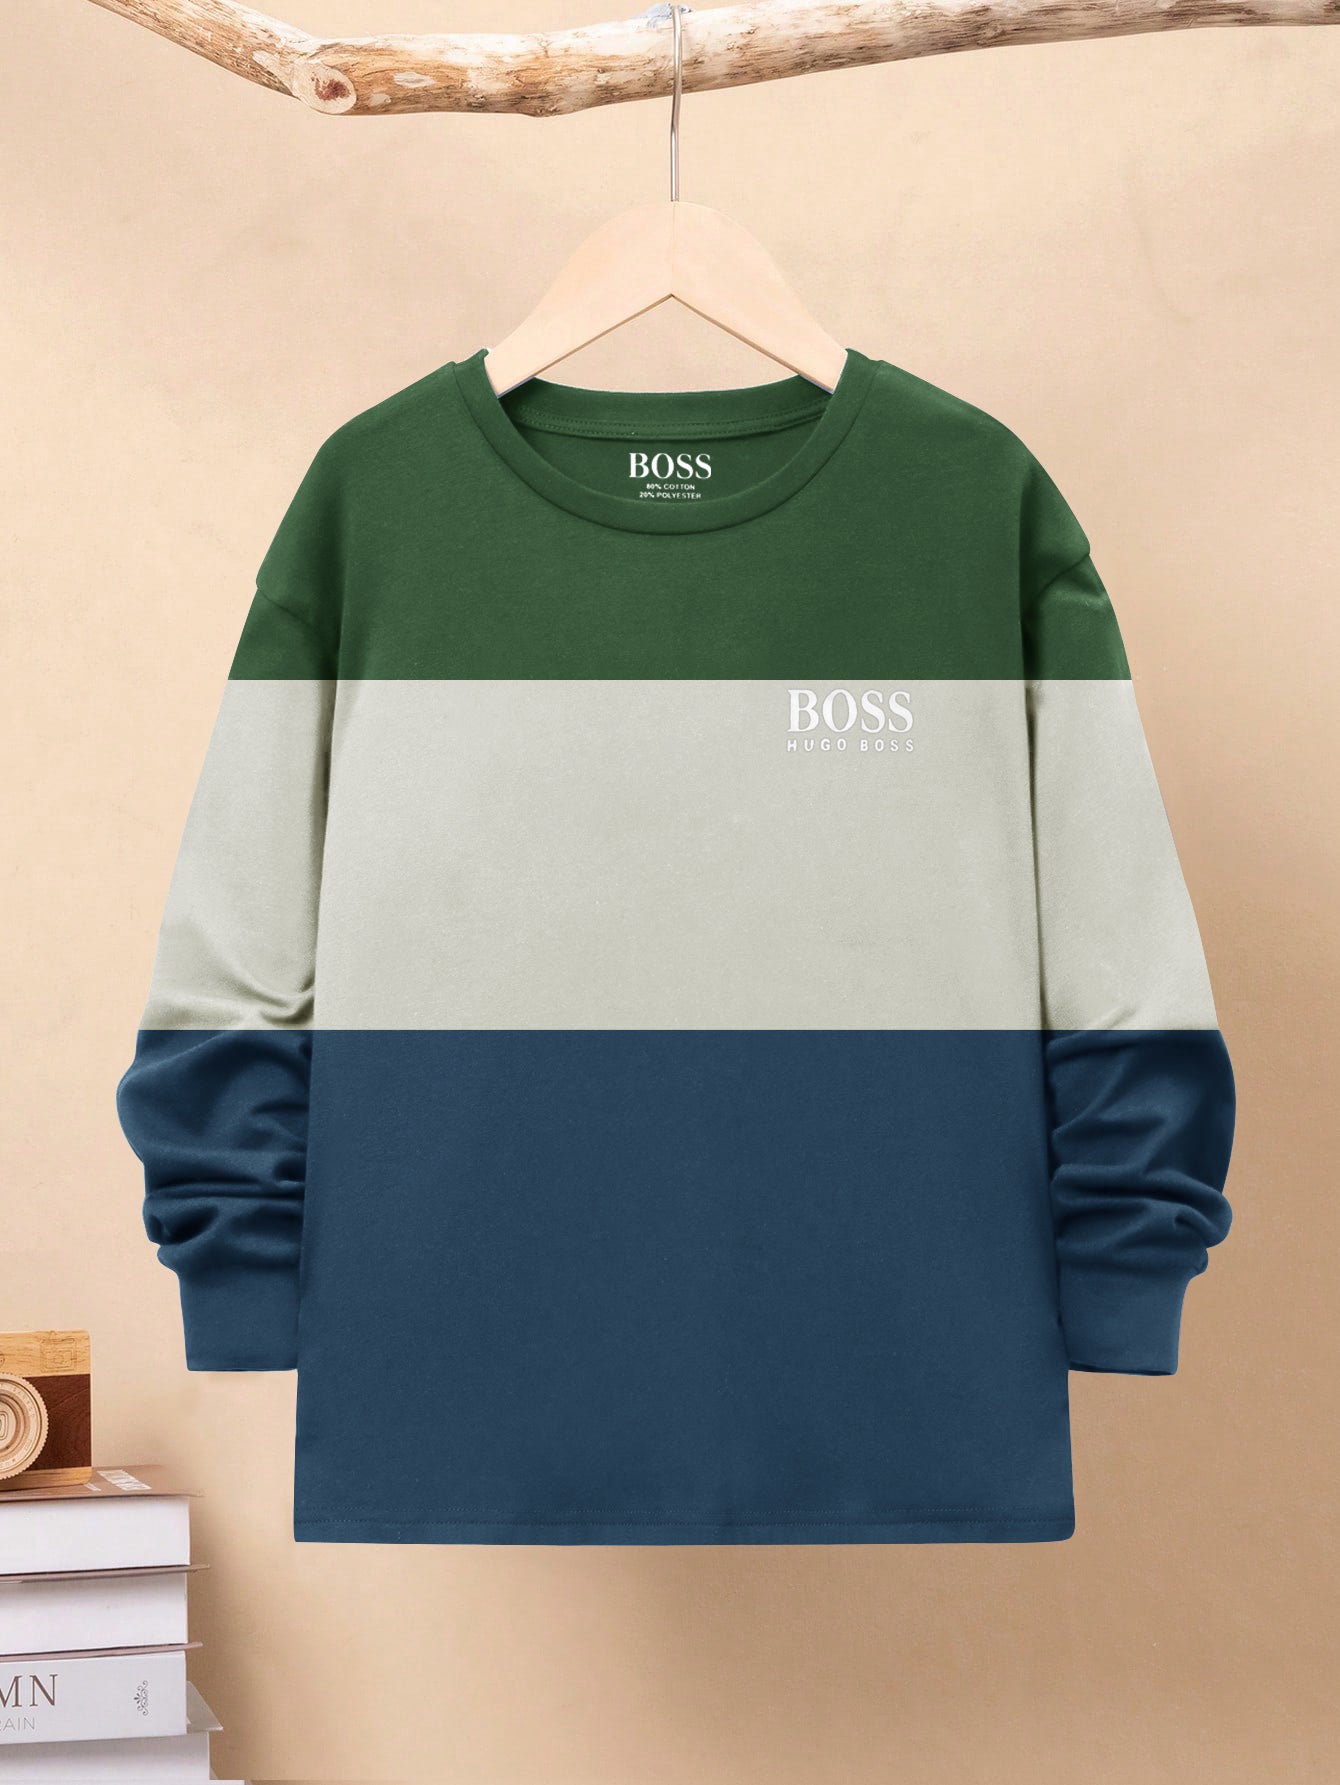 HB Crew Neck Long Sleeve Single Jersey Tee Shirt For Kids-Green with Off White & Blue-SP1713/RT2417